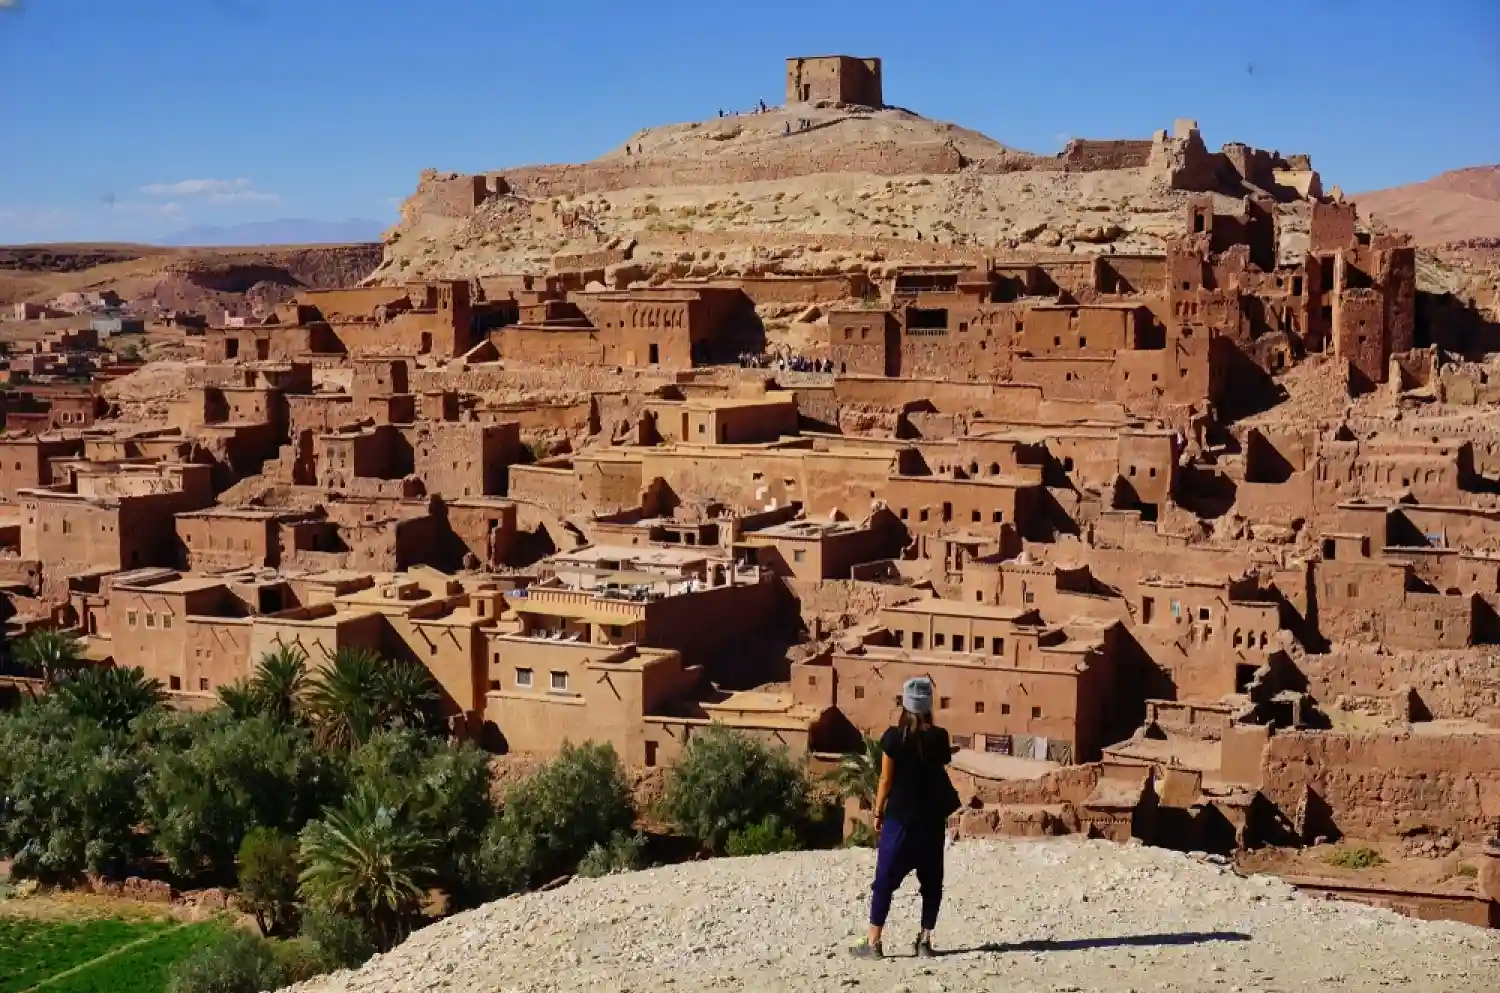 Day 6: From Dades Valley to Ouarzazate, Kasbah Ait Ben Haddou and Marrakech.